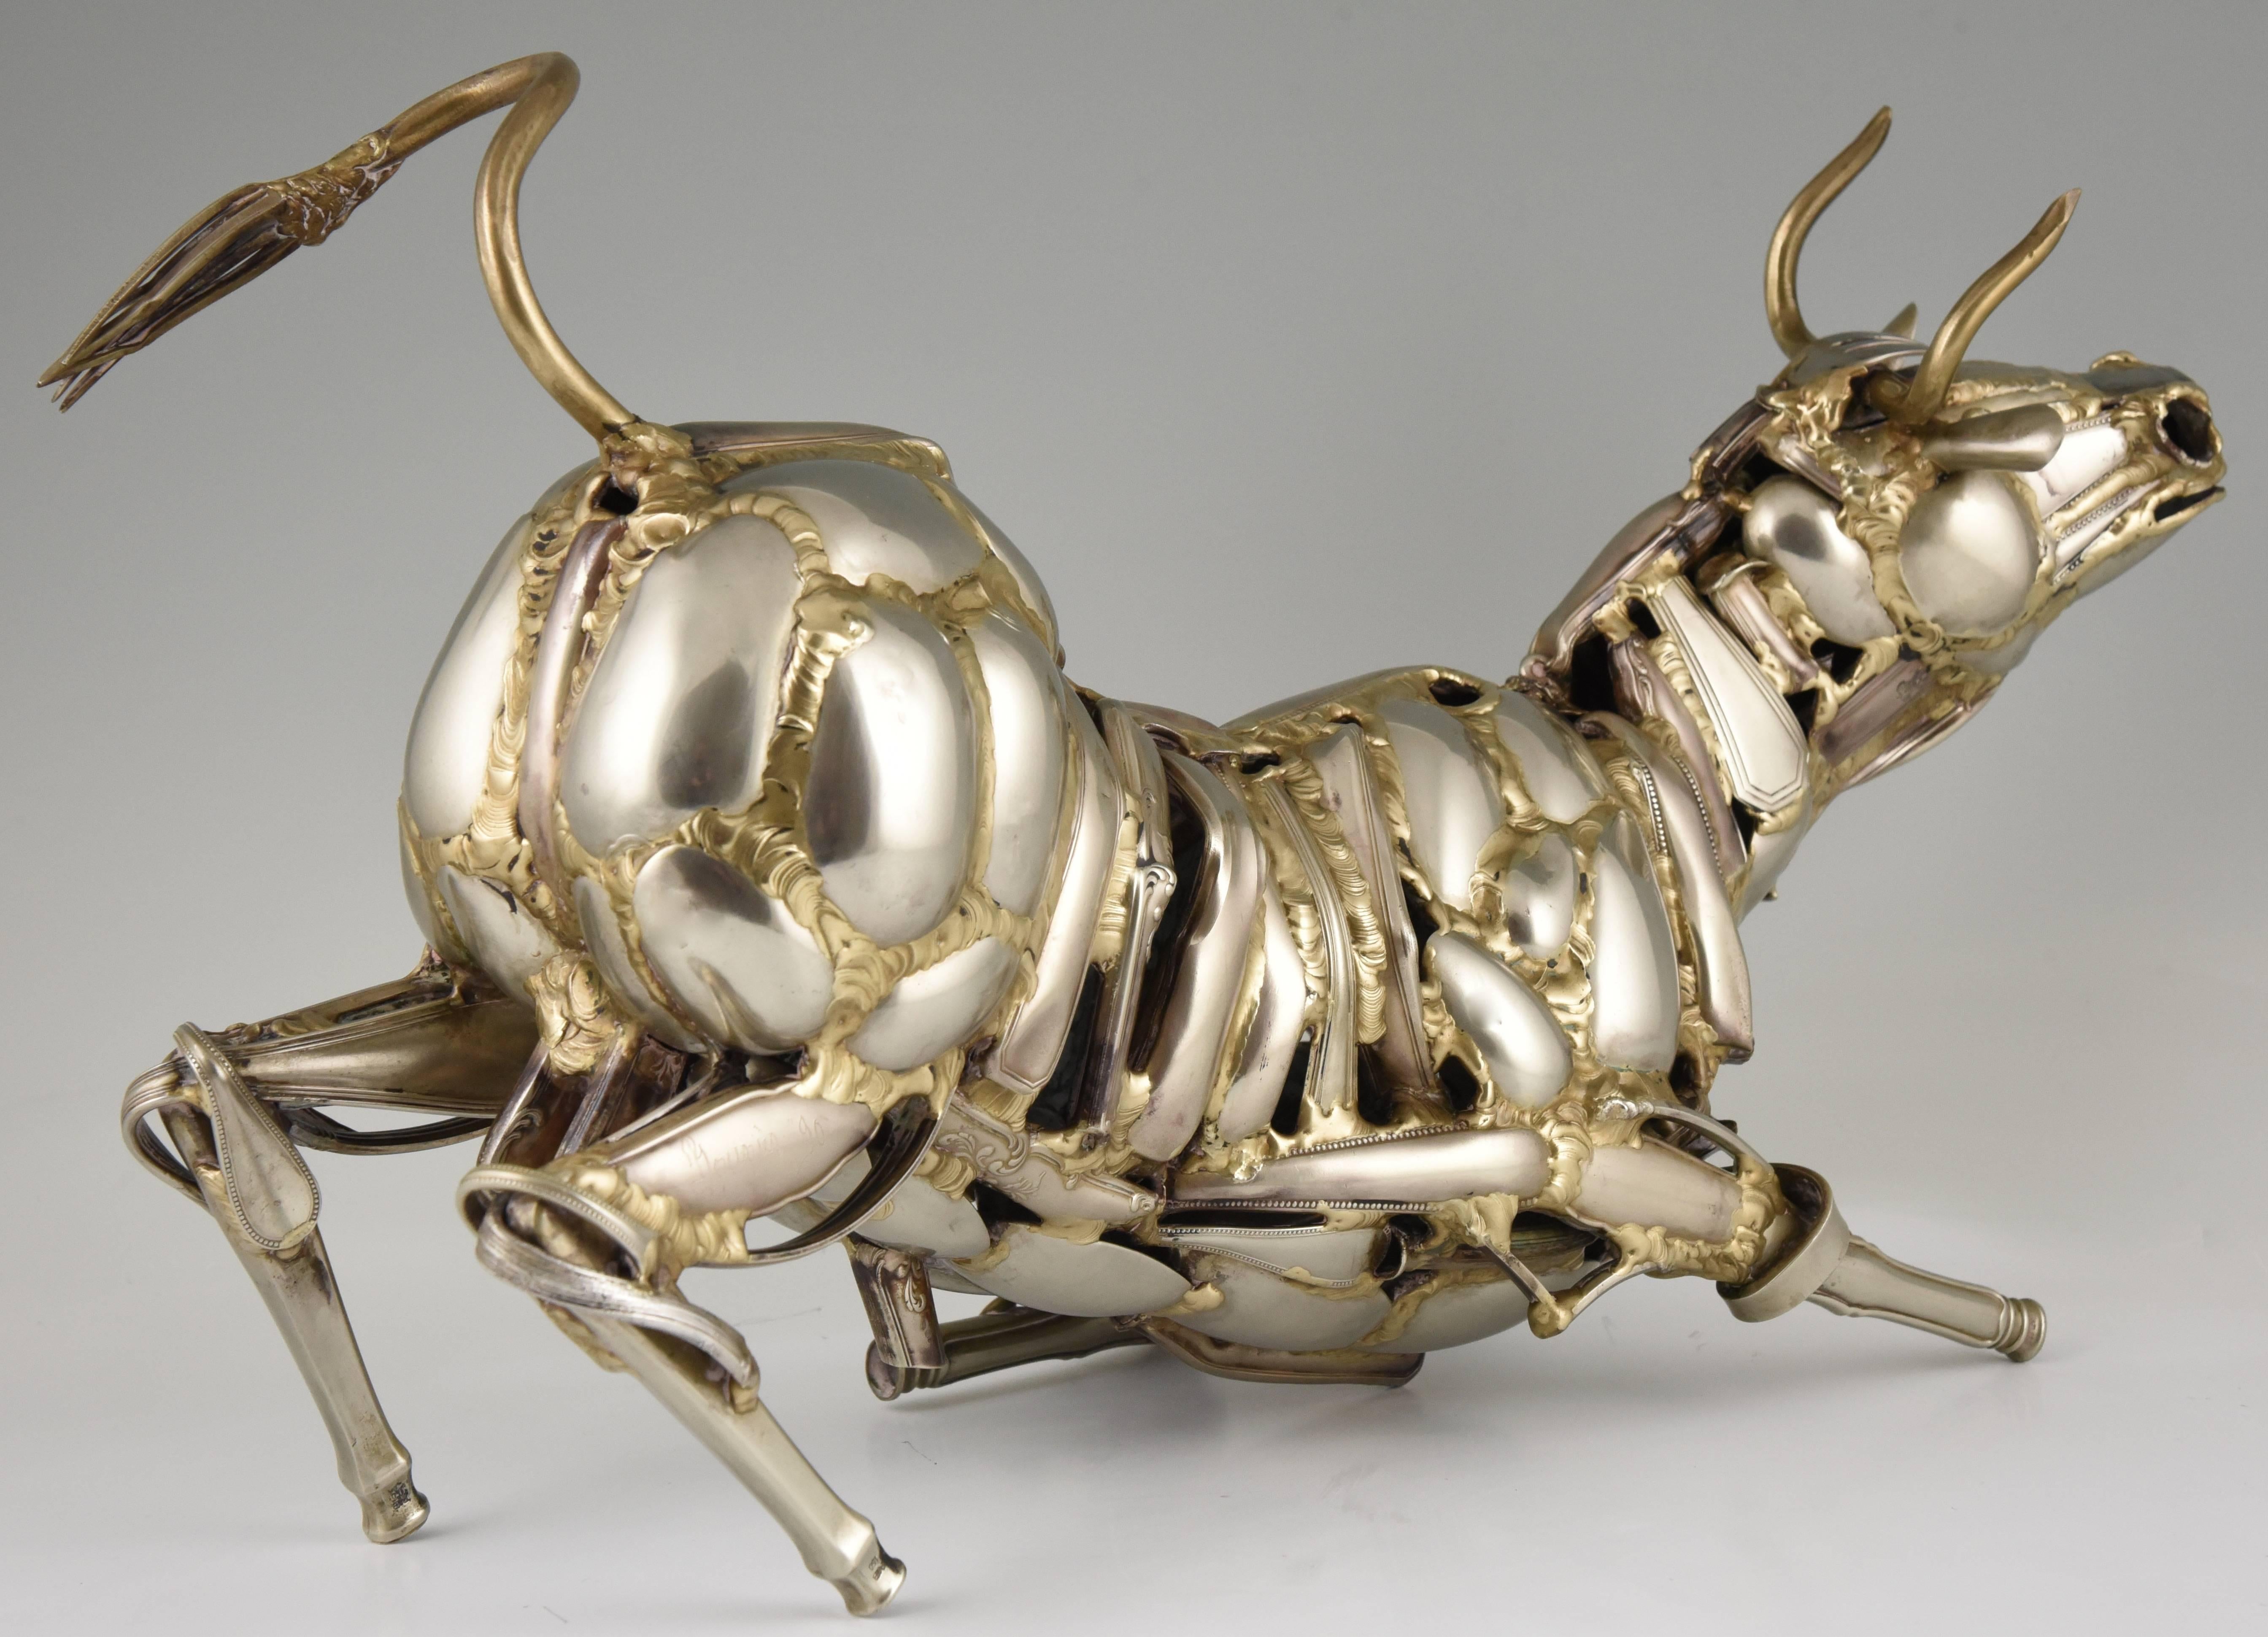 Metal The bull, large cutlery sculpture by Gerard Bouvier signed and dated 1990